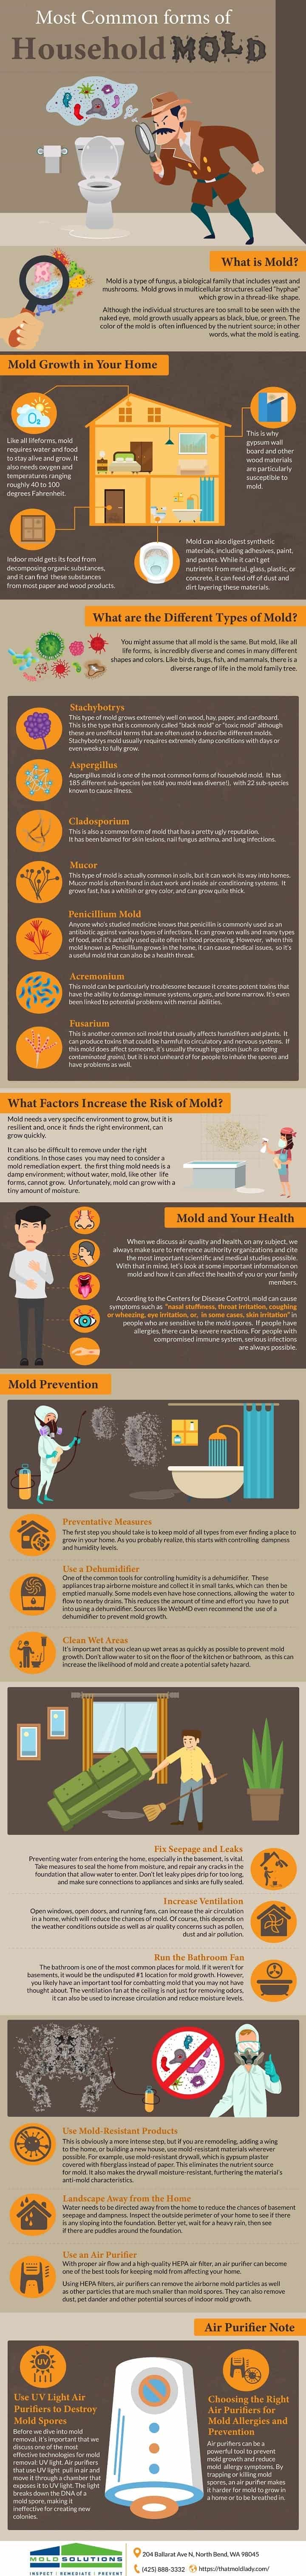 Most Common forms of Household Mold (Infographic)